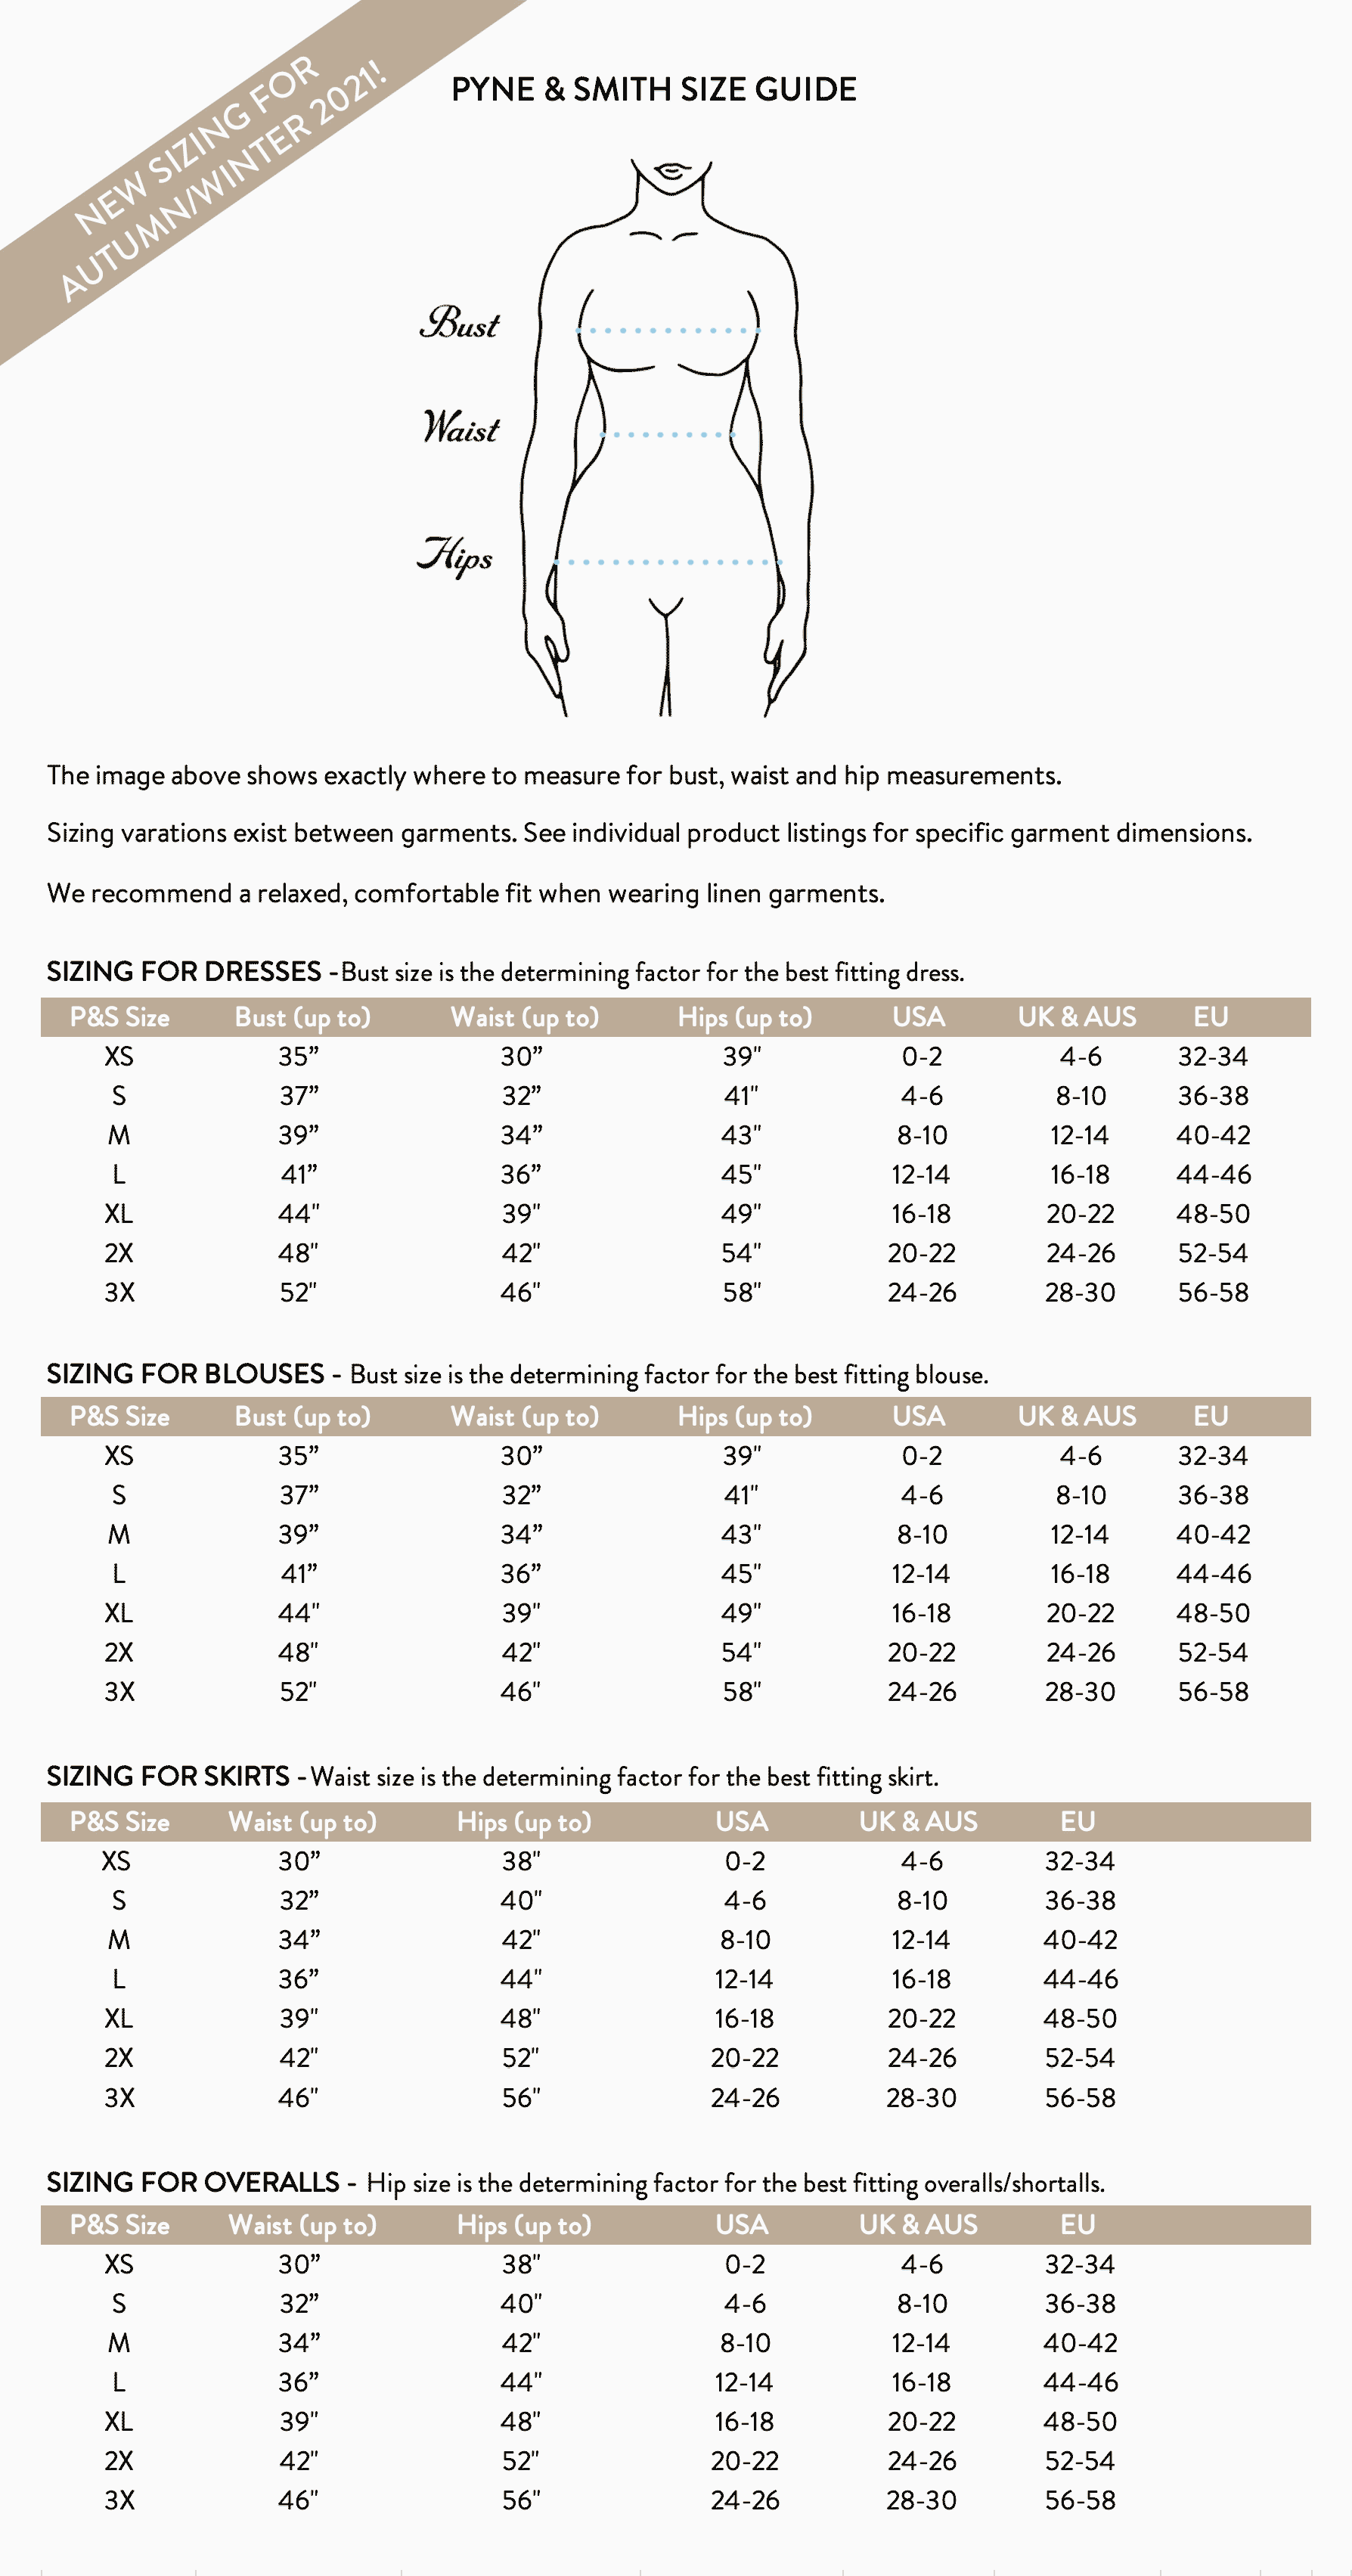 New sizing chart for AW 2021